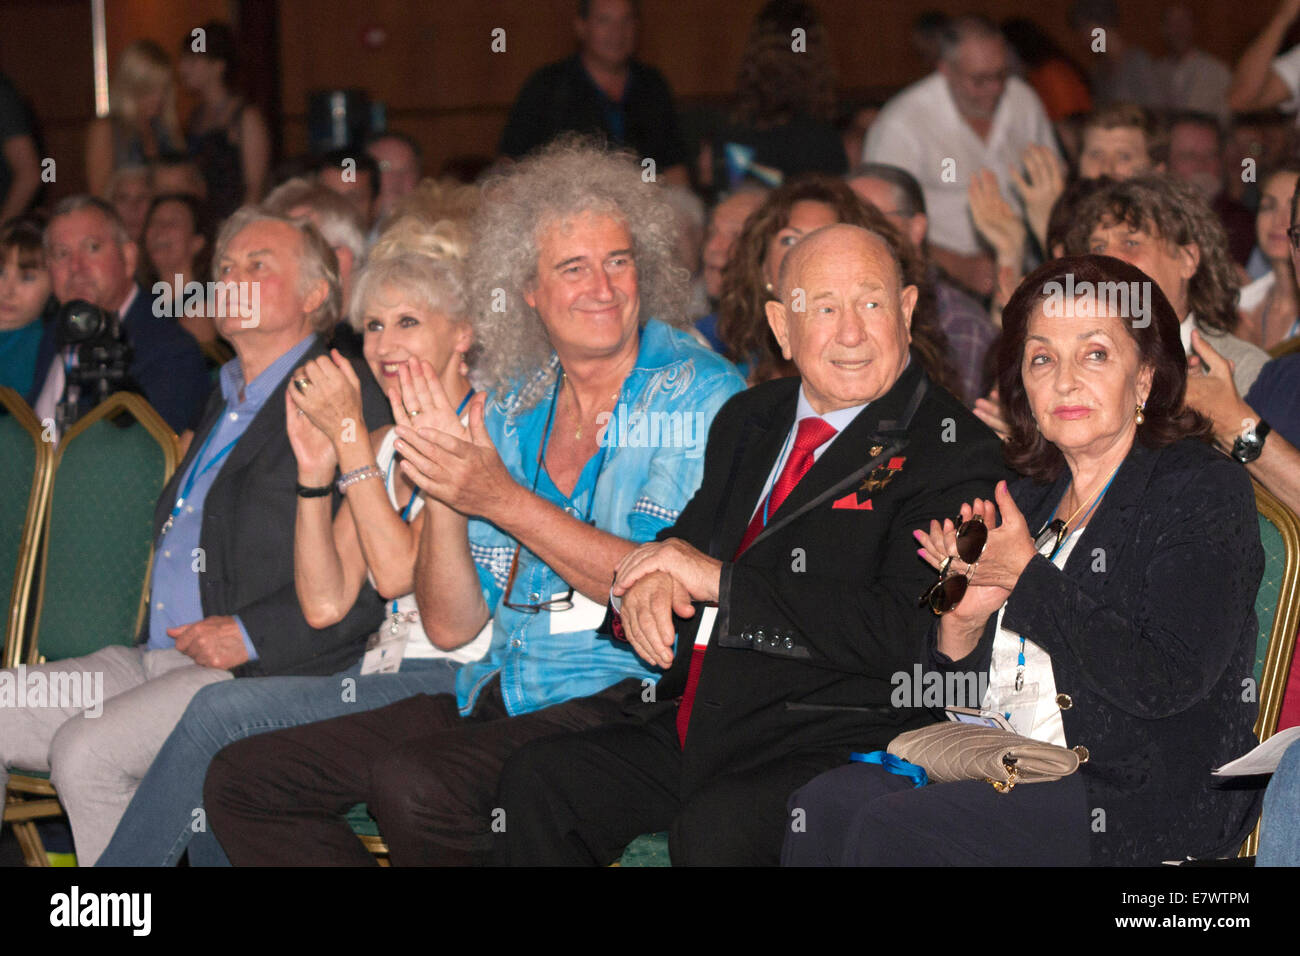 Ethologist Richard Dawkins, actress Anita Dobson, musician Brian May of Queen and Cosmonaut Alexey Leonov/Alexei Archipowitsch Leonow and wife Oksana Leonova attending the second editon of the Starmus Festival at the Abama Golf & Spa Resort in Tenerife, Canary Islands on September 22, 2014/picture alliance Stock Photo